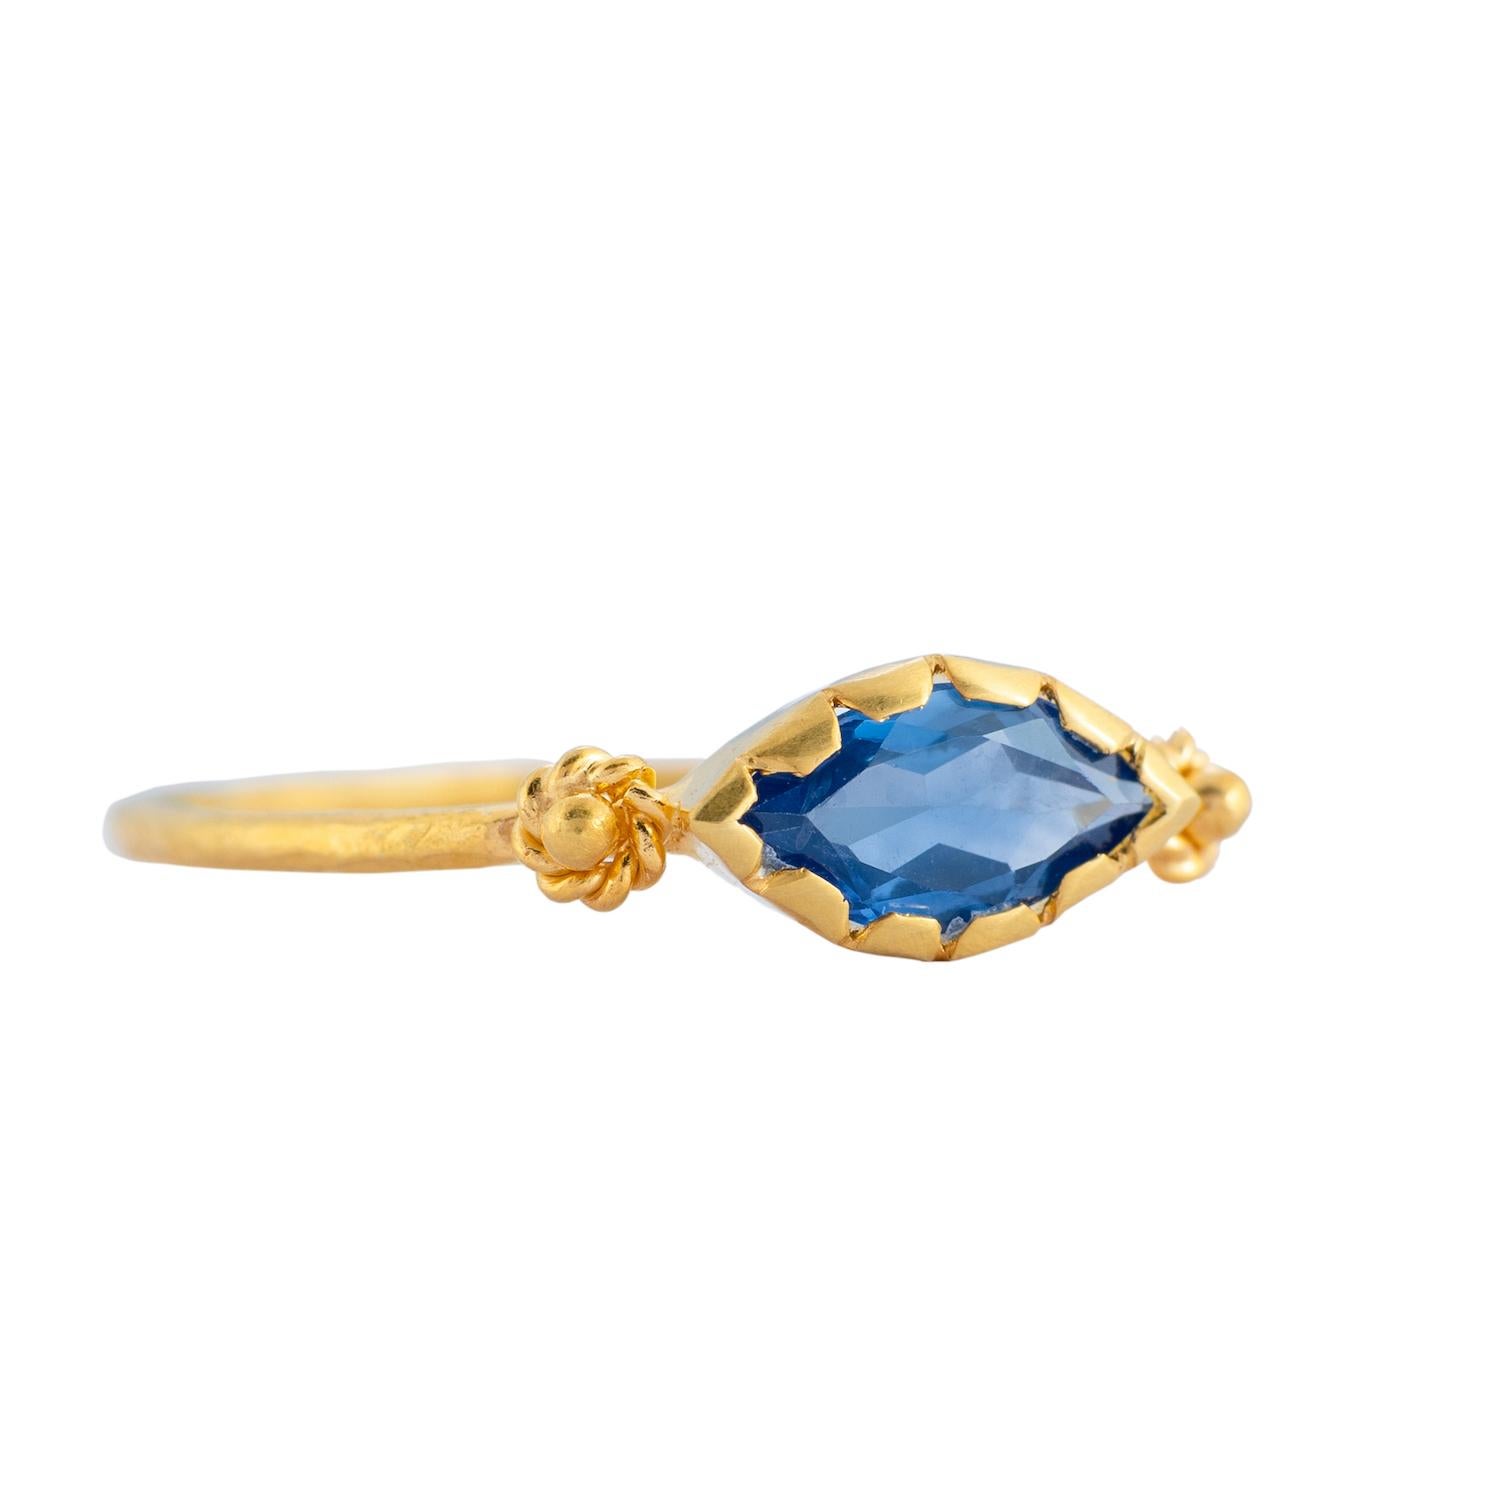 This beautiful one-of-a-kind 14ct blue sapphire gold stacking ring has been handmade in our workshops. The ring is flanked with embossed work. It looks great on it's own or stacked, whatever your preference.

Ring dimensions - 1mm
Stone size - 9mm x